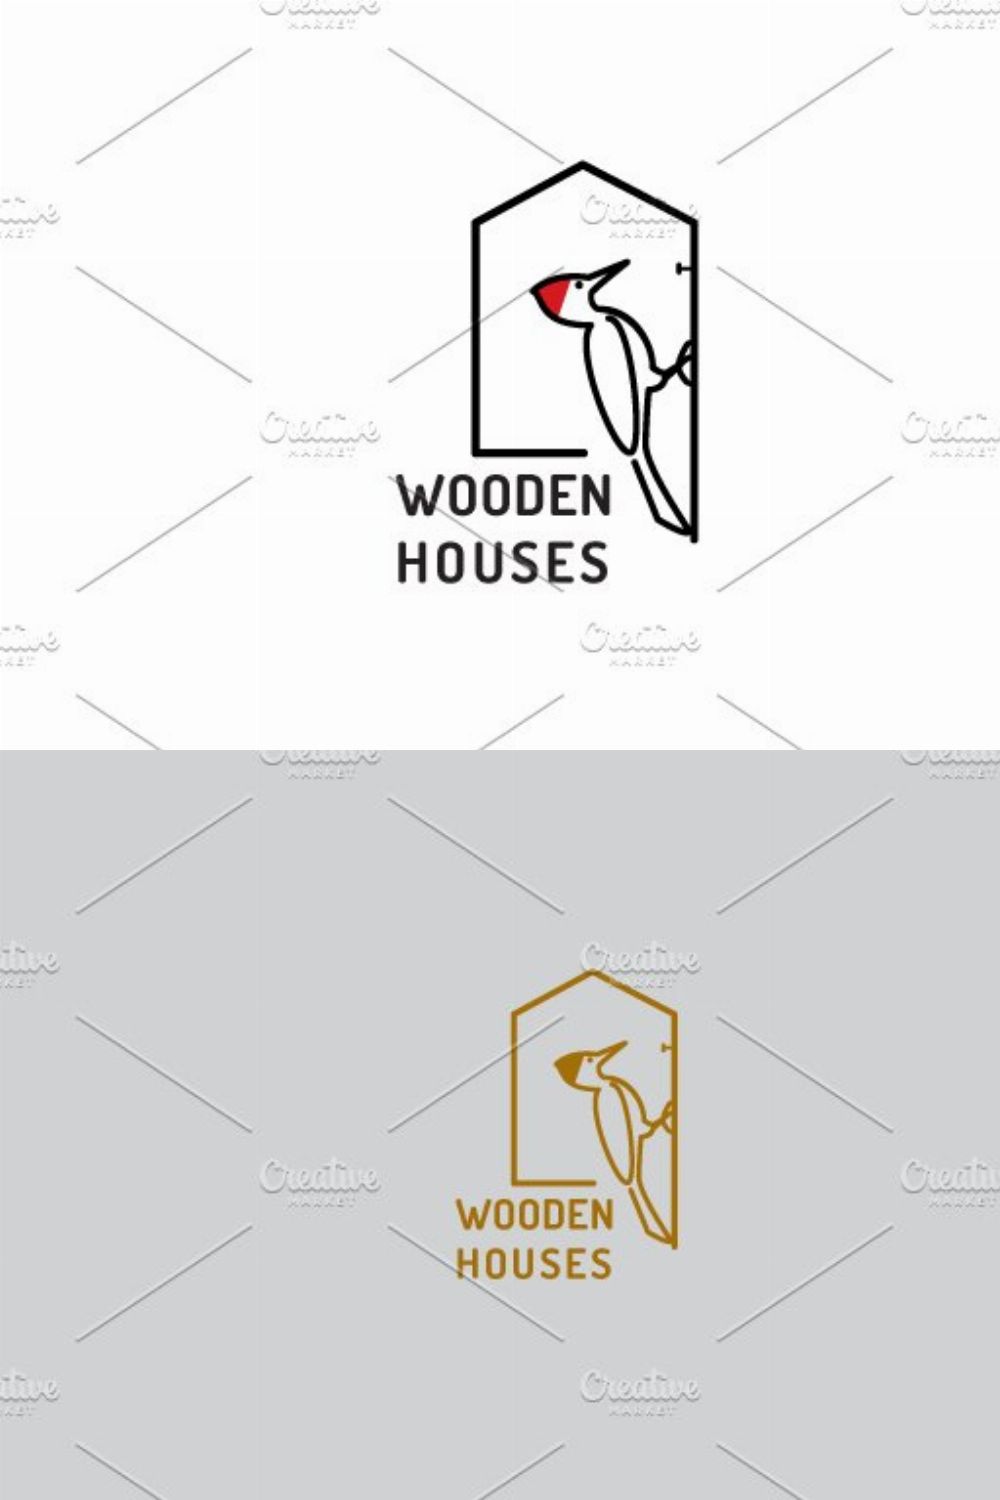 WoodenHouses_logo pinterest preview image.